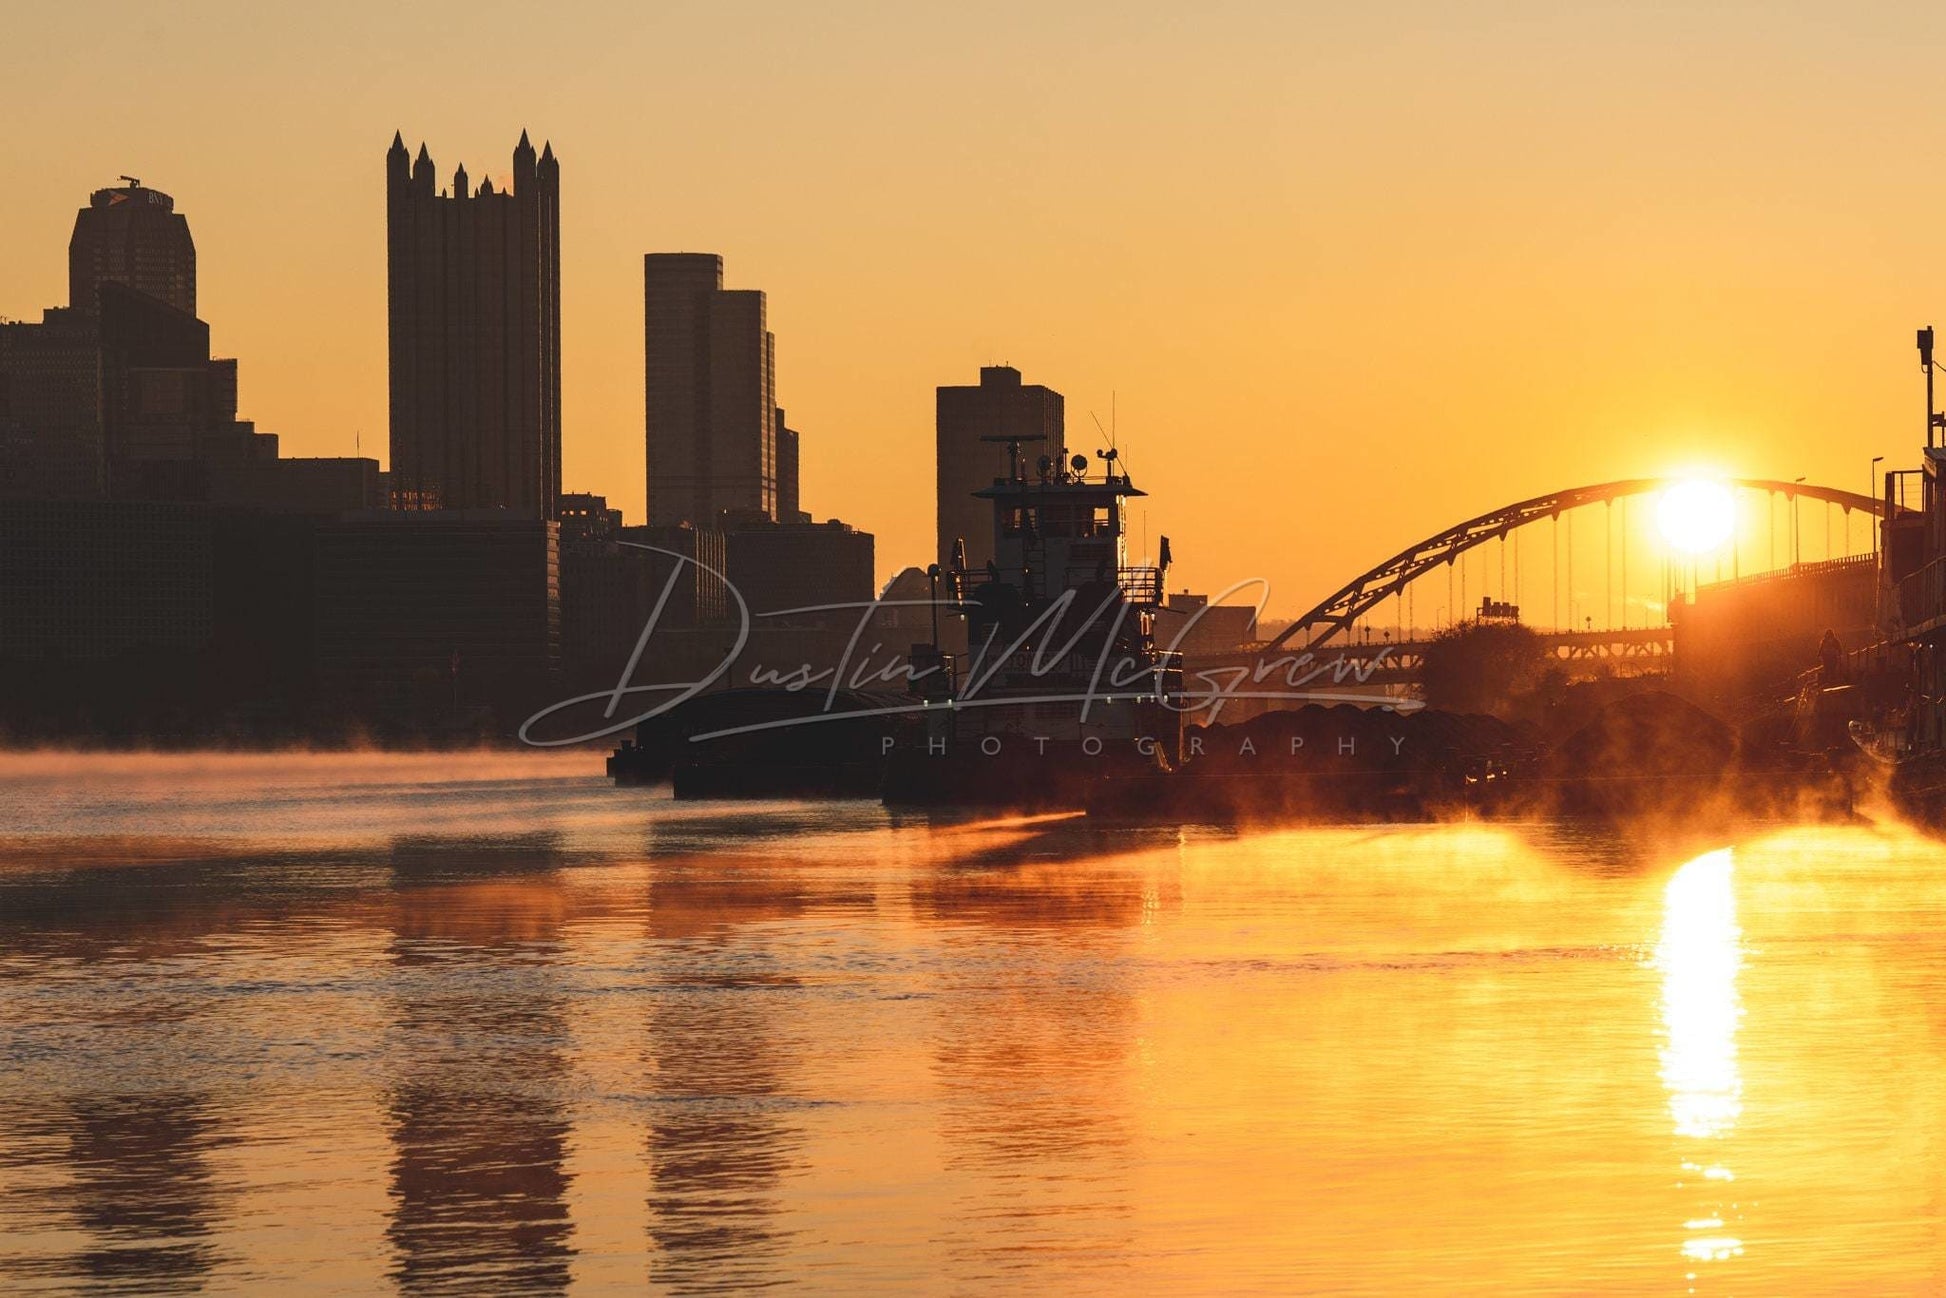 Pittsburgh Photo Print - Steam Rises From The Rivers As A Tow Boat Parks Barge Photograph Skyline